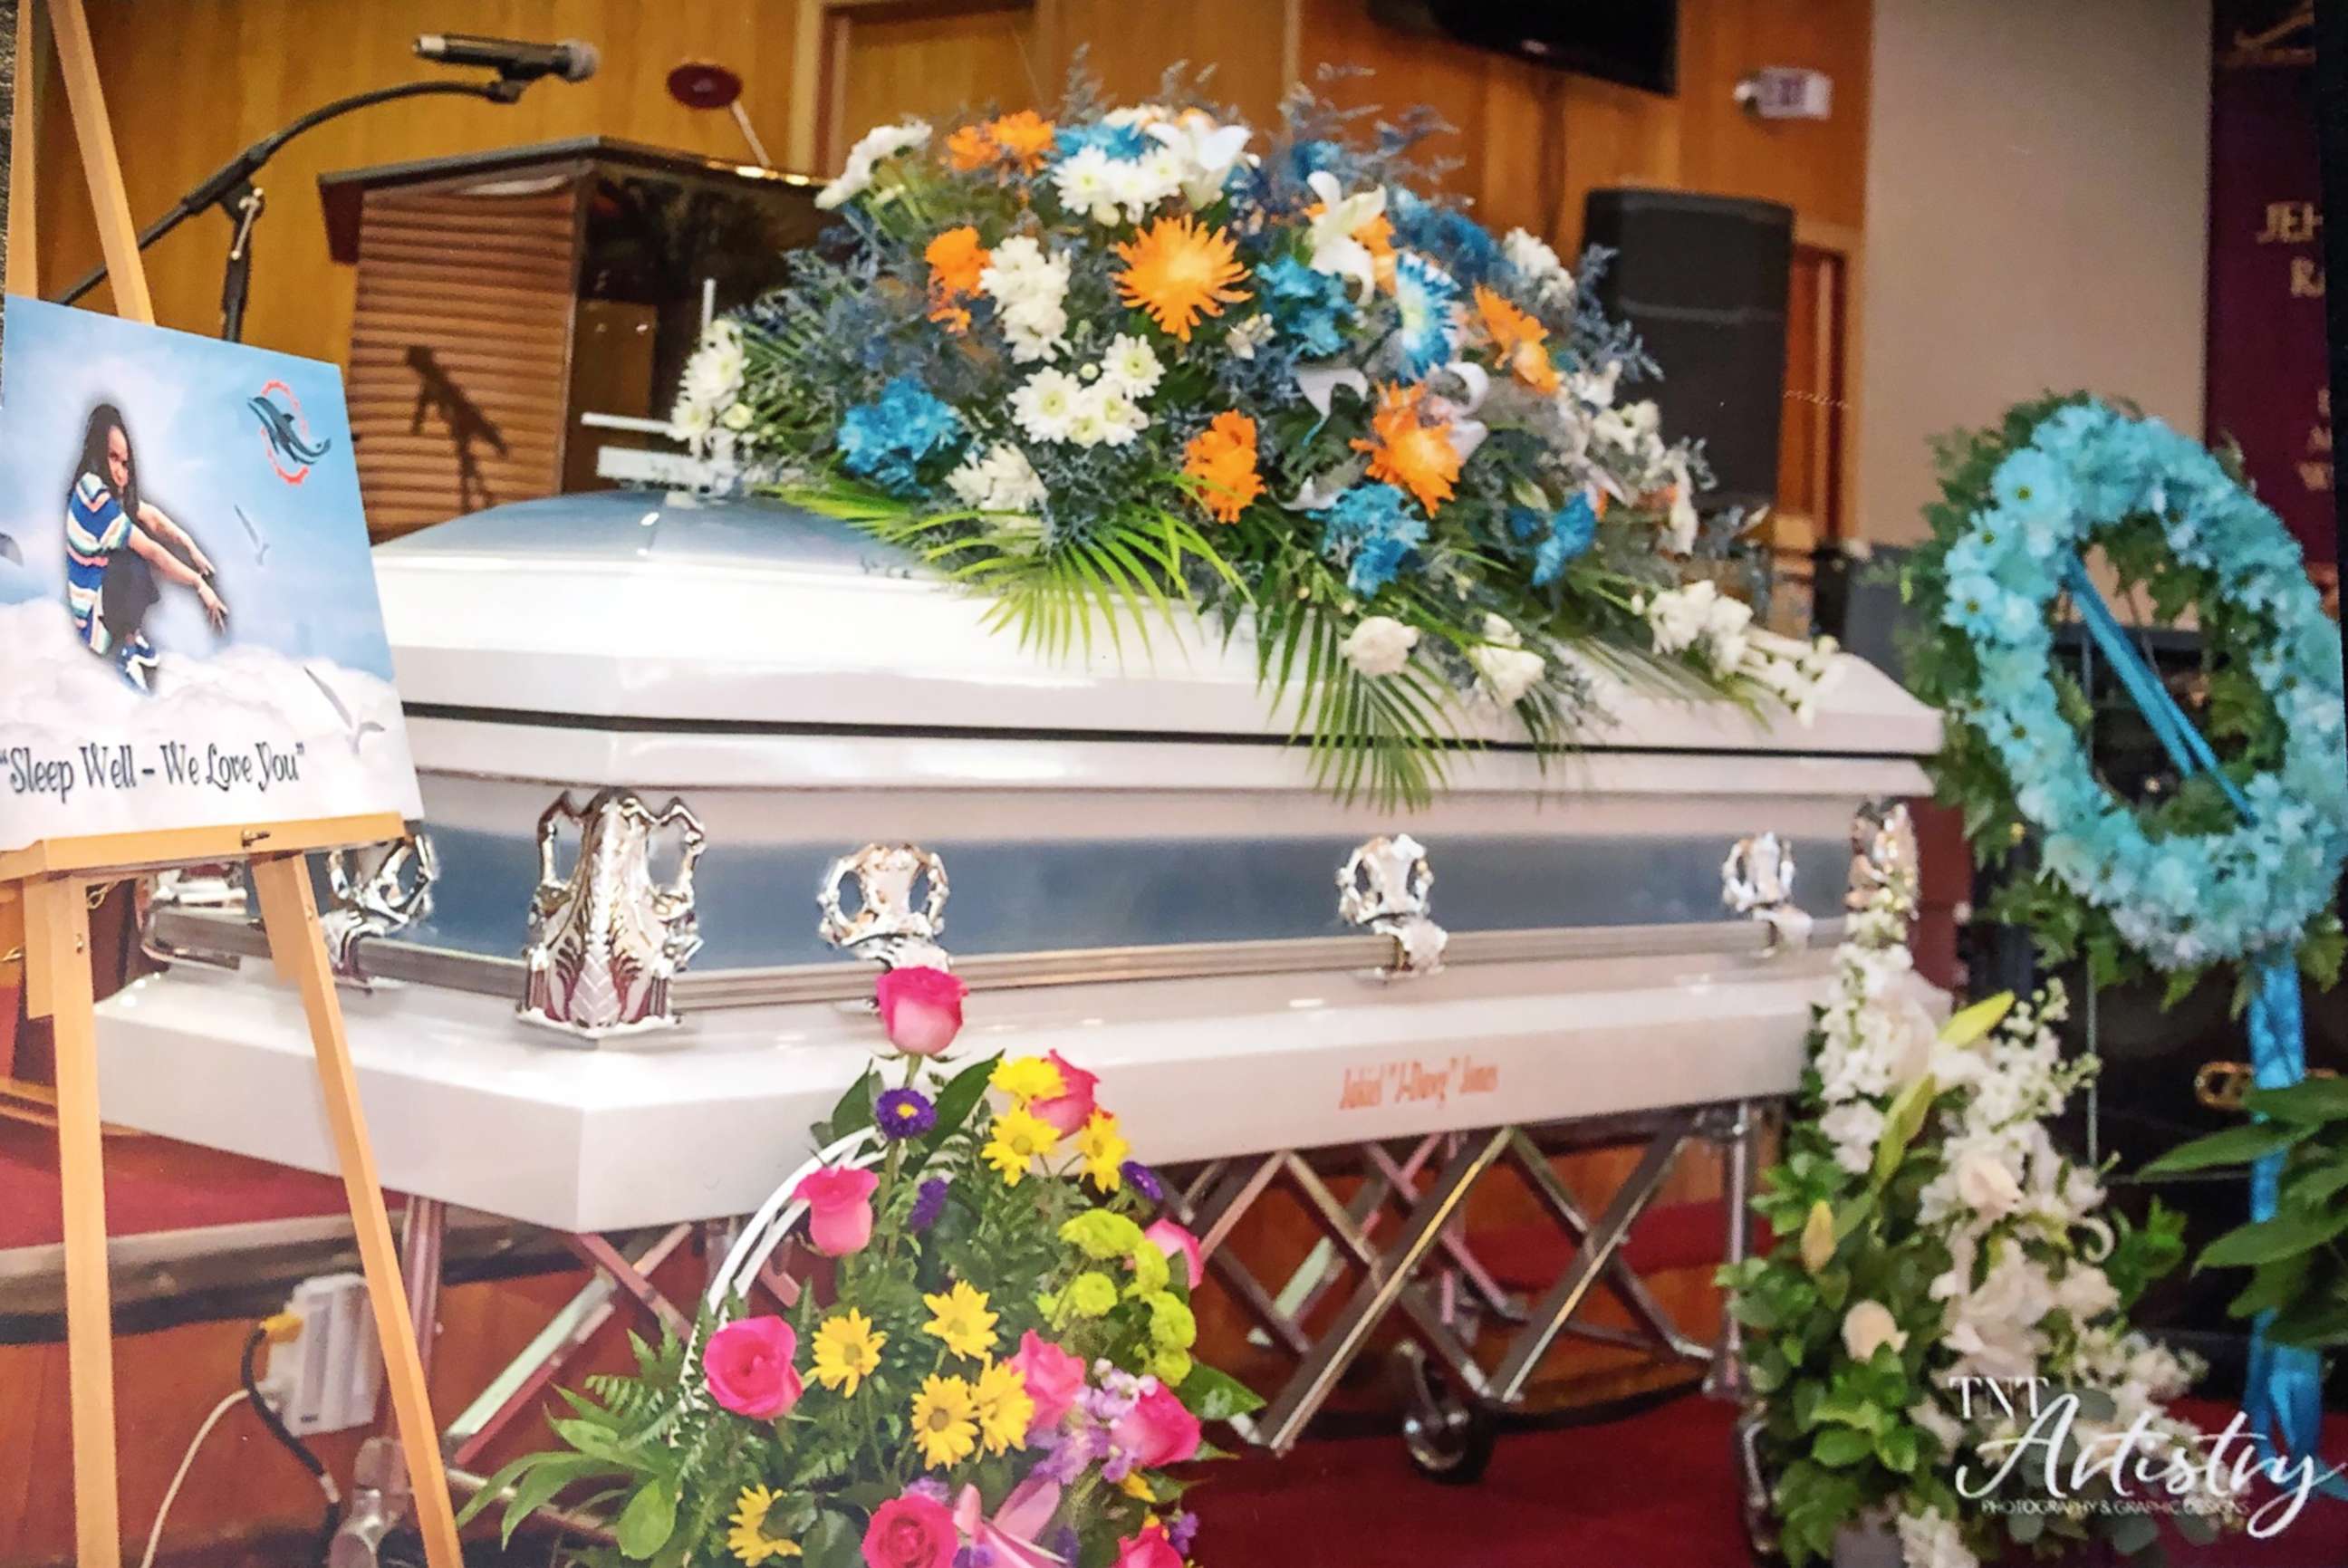 PHOTO: Jakiel Jones' casket is pictured in this undated image released by her family.